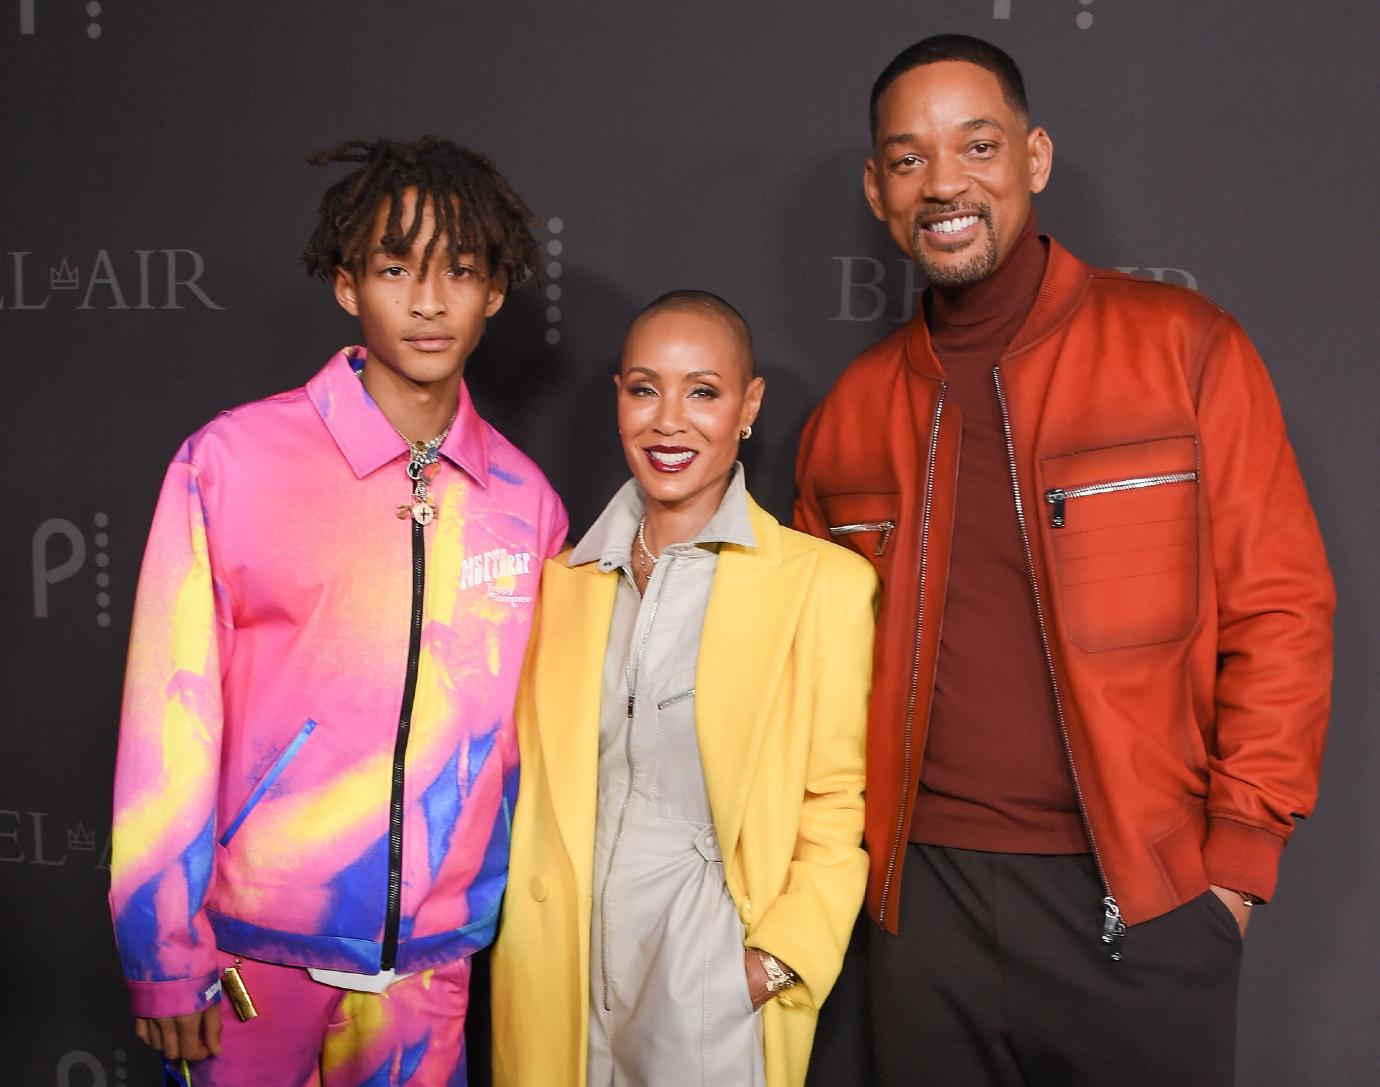 Oscars 2022: What Will Smith's Son Jaden Tweeted About Smackdown